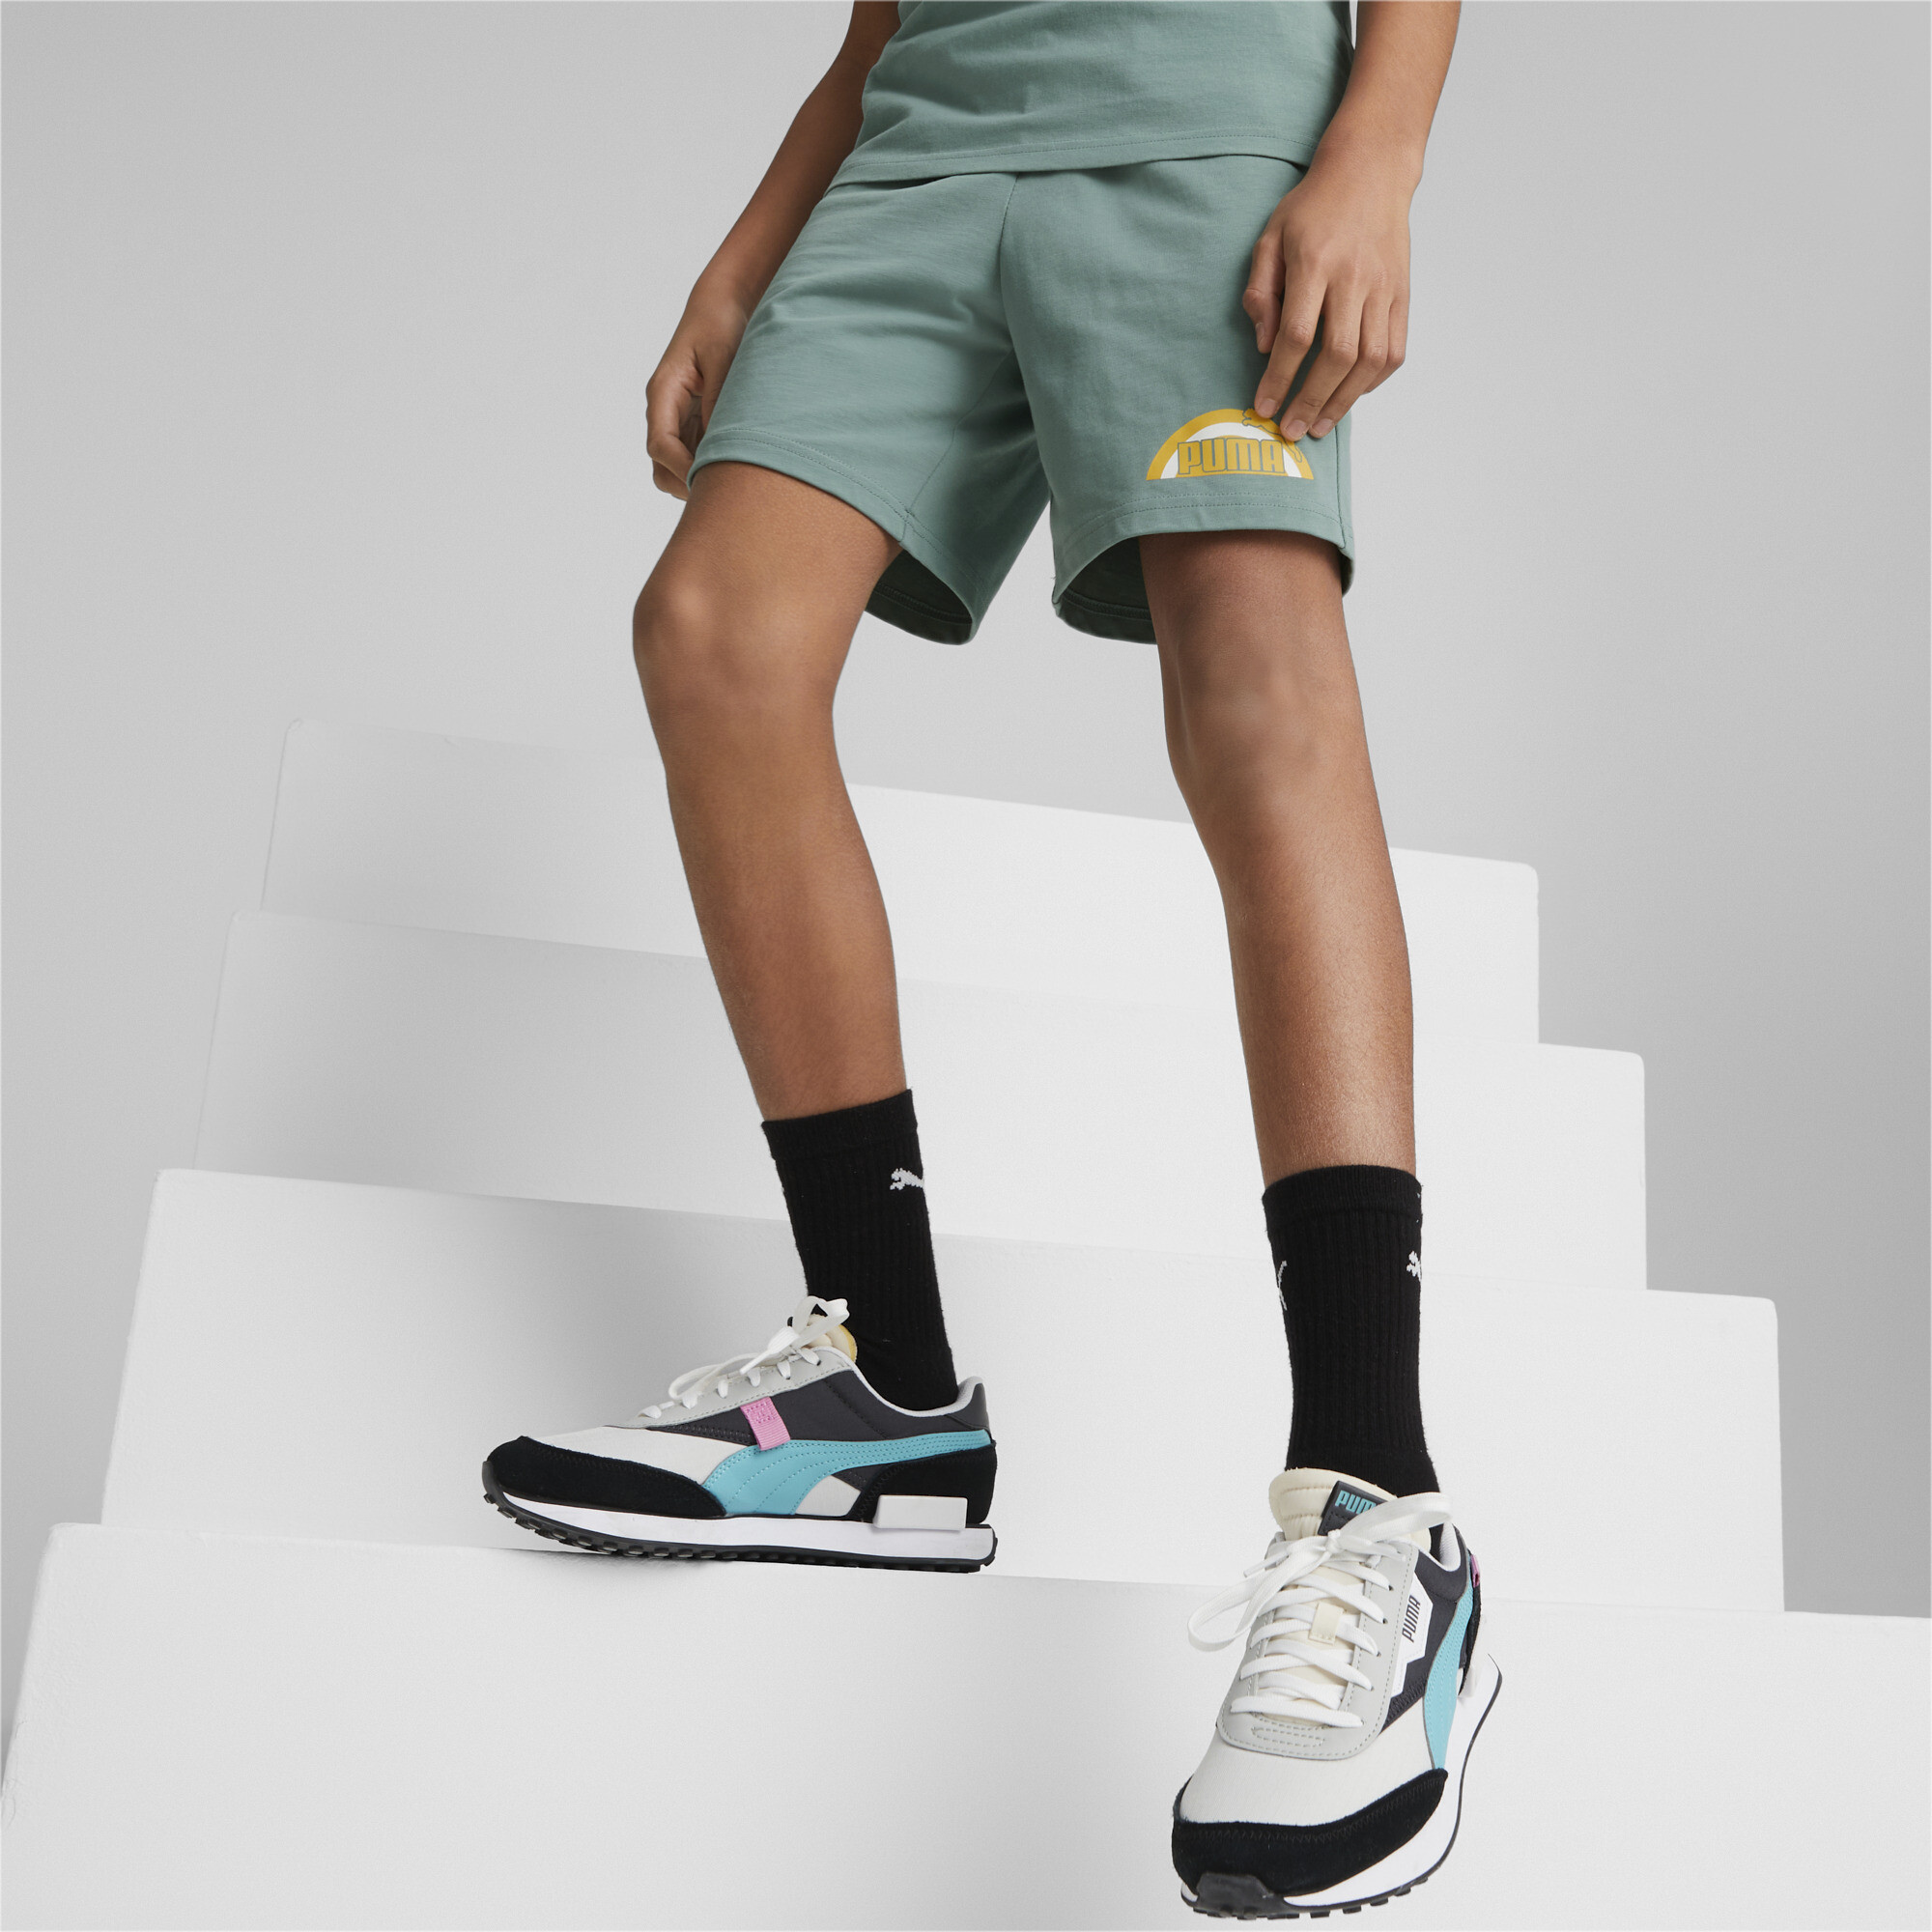 PUMA Essentials+ Street Art Shorts In Gray, Size 13-14 Youth